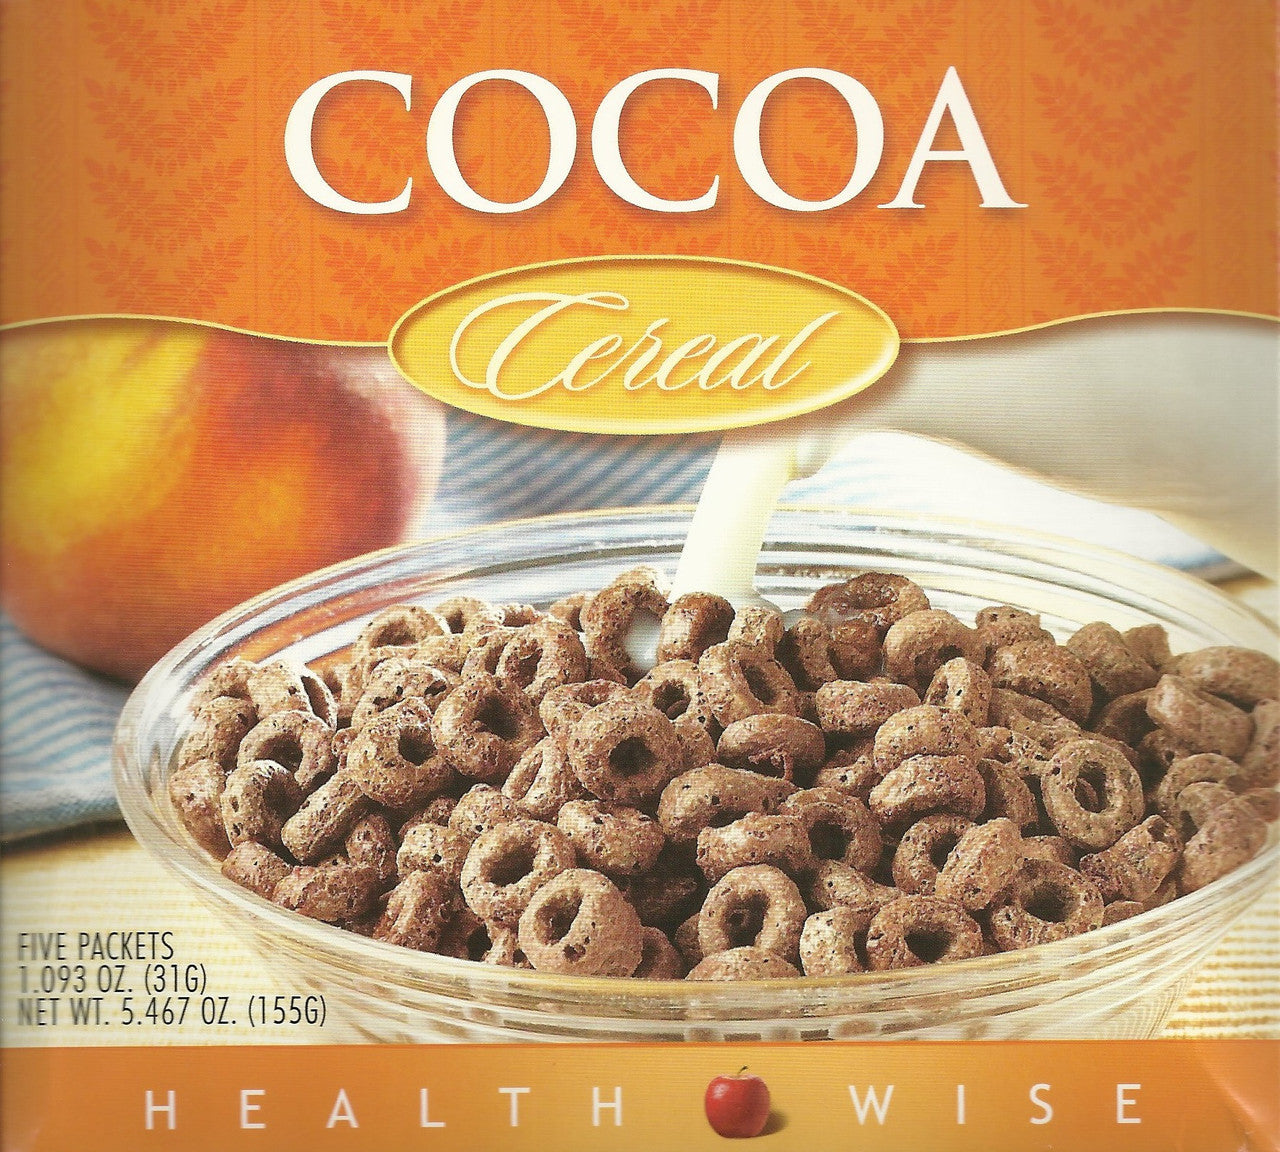 Cocoa Cereal